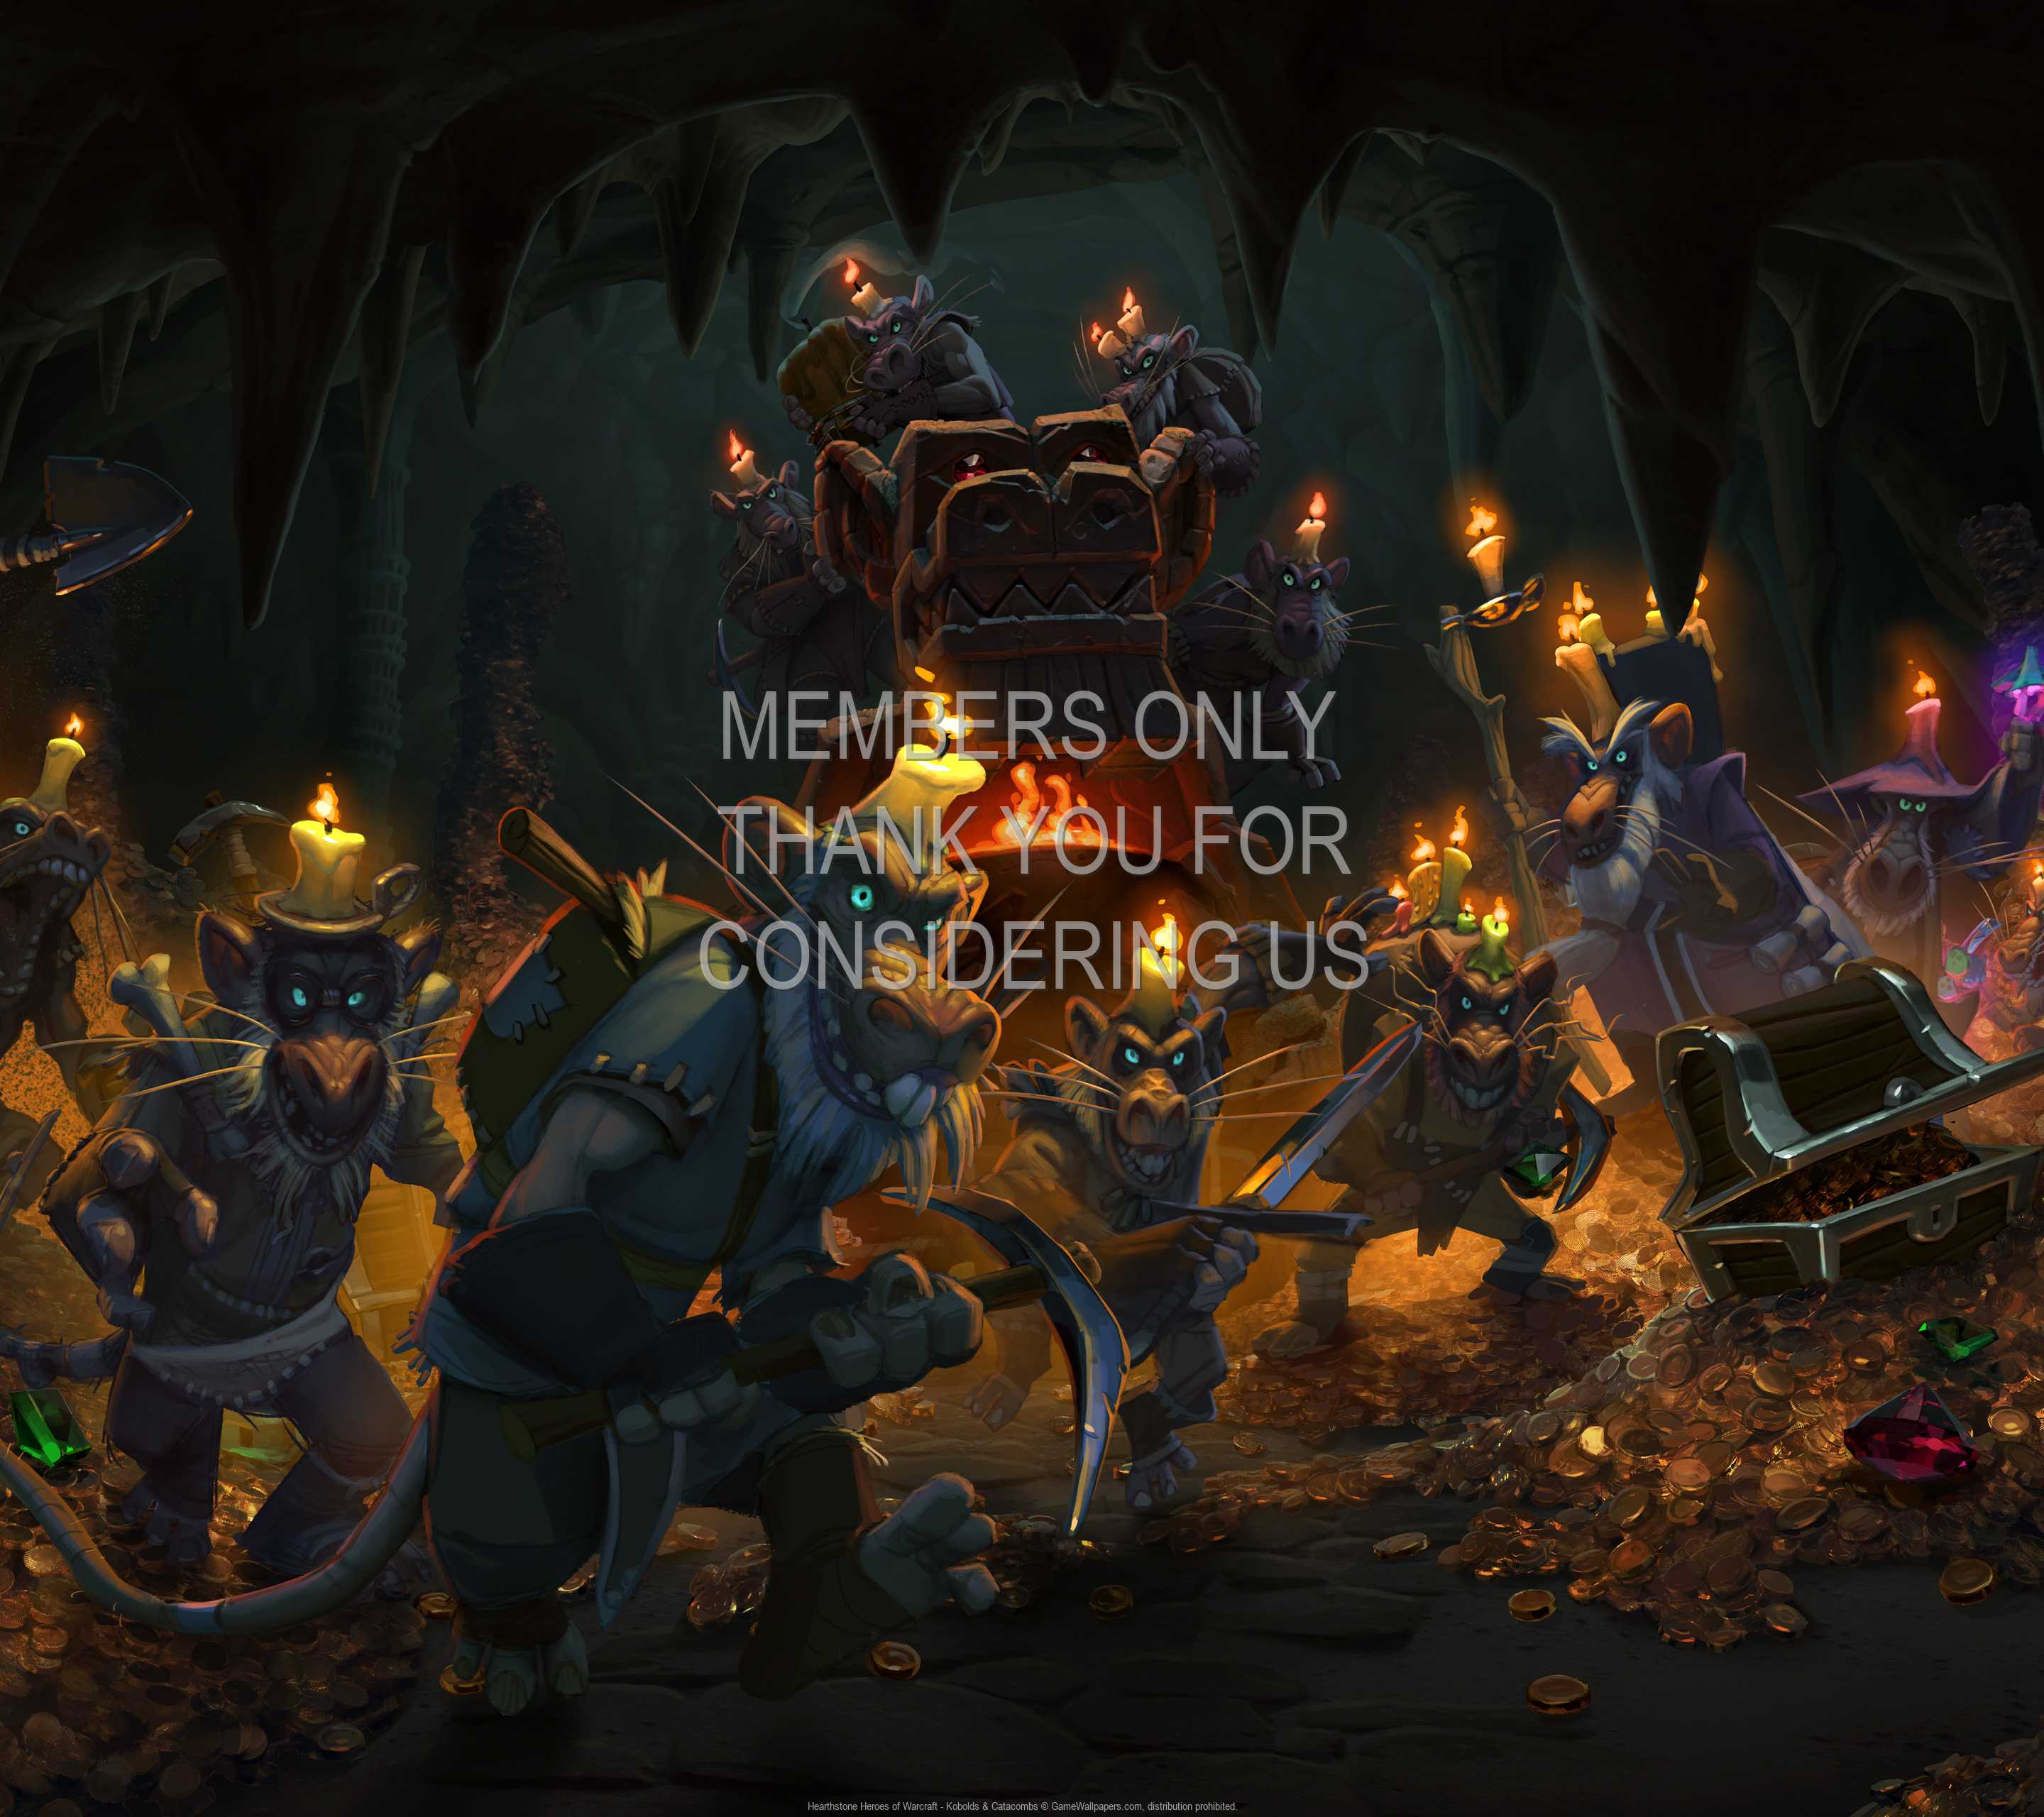 Hearthstone: Heroes of Warcraft - Kobolds & Catacombs 1440p Horizontal Mobiele achtergrond 02